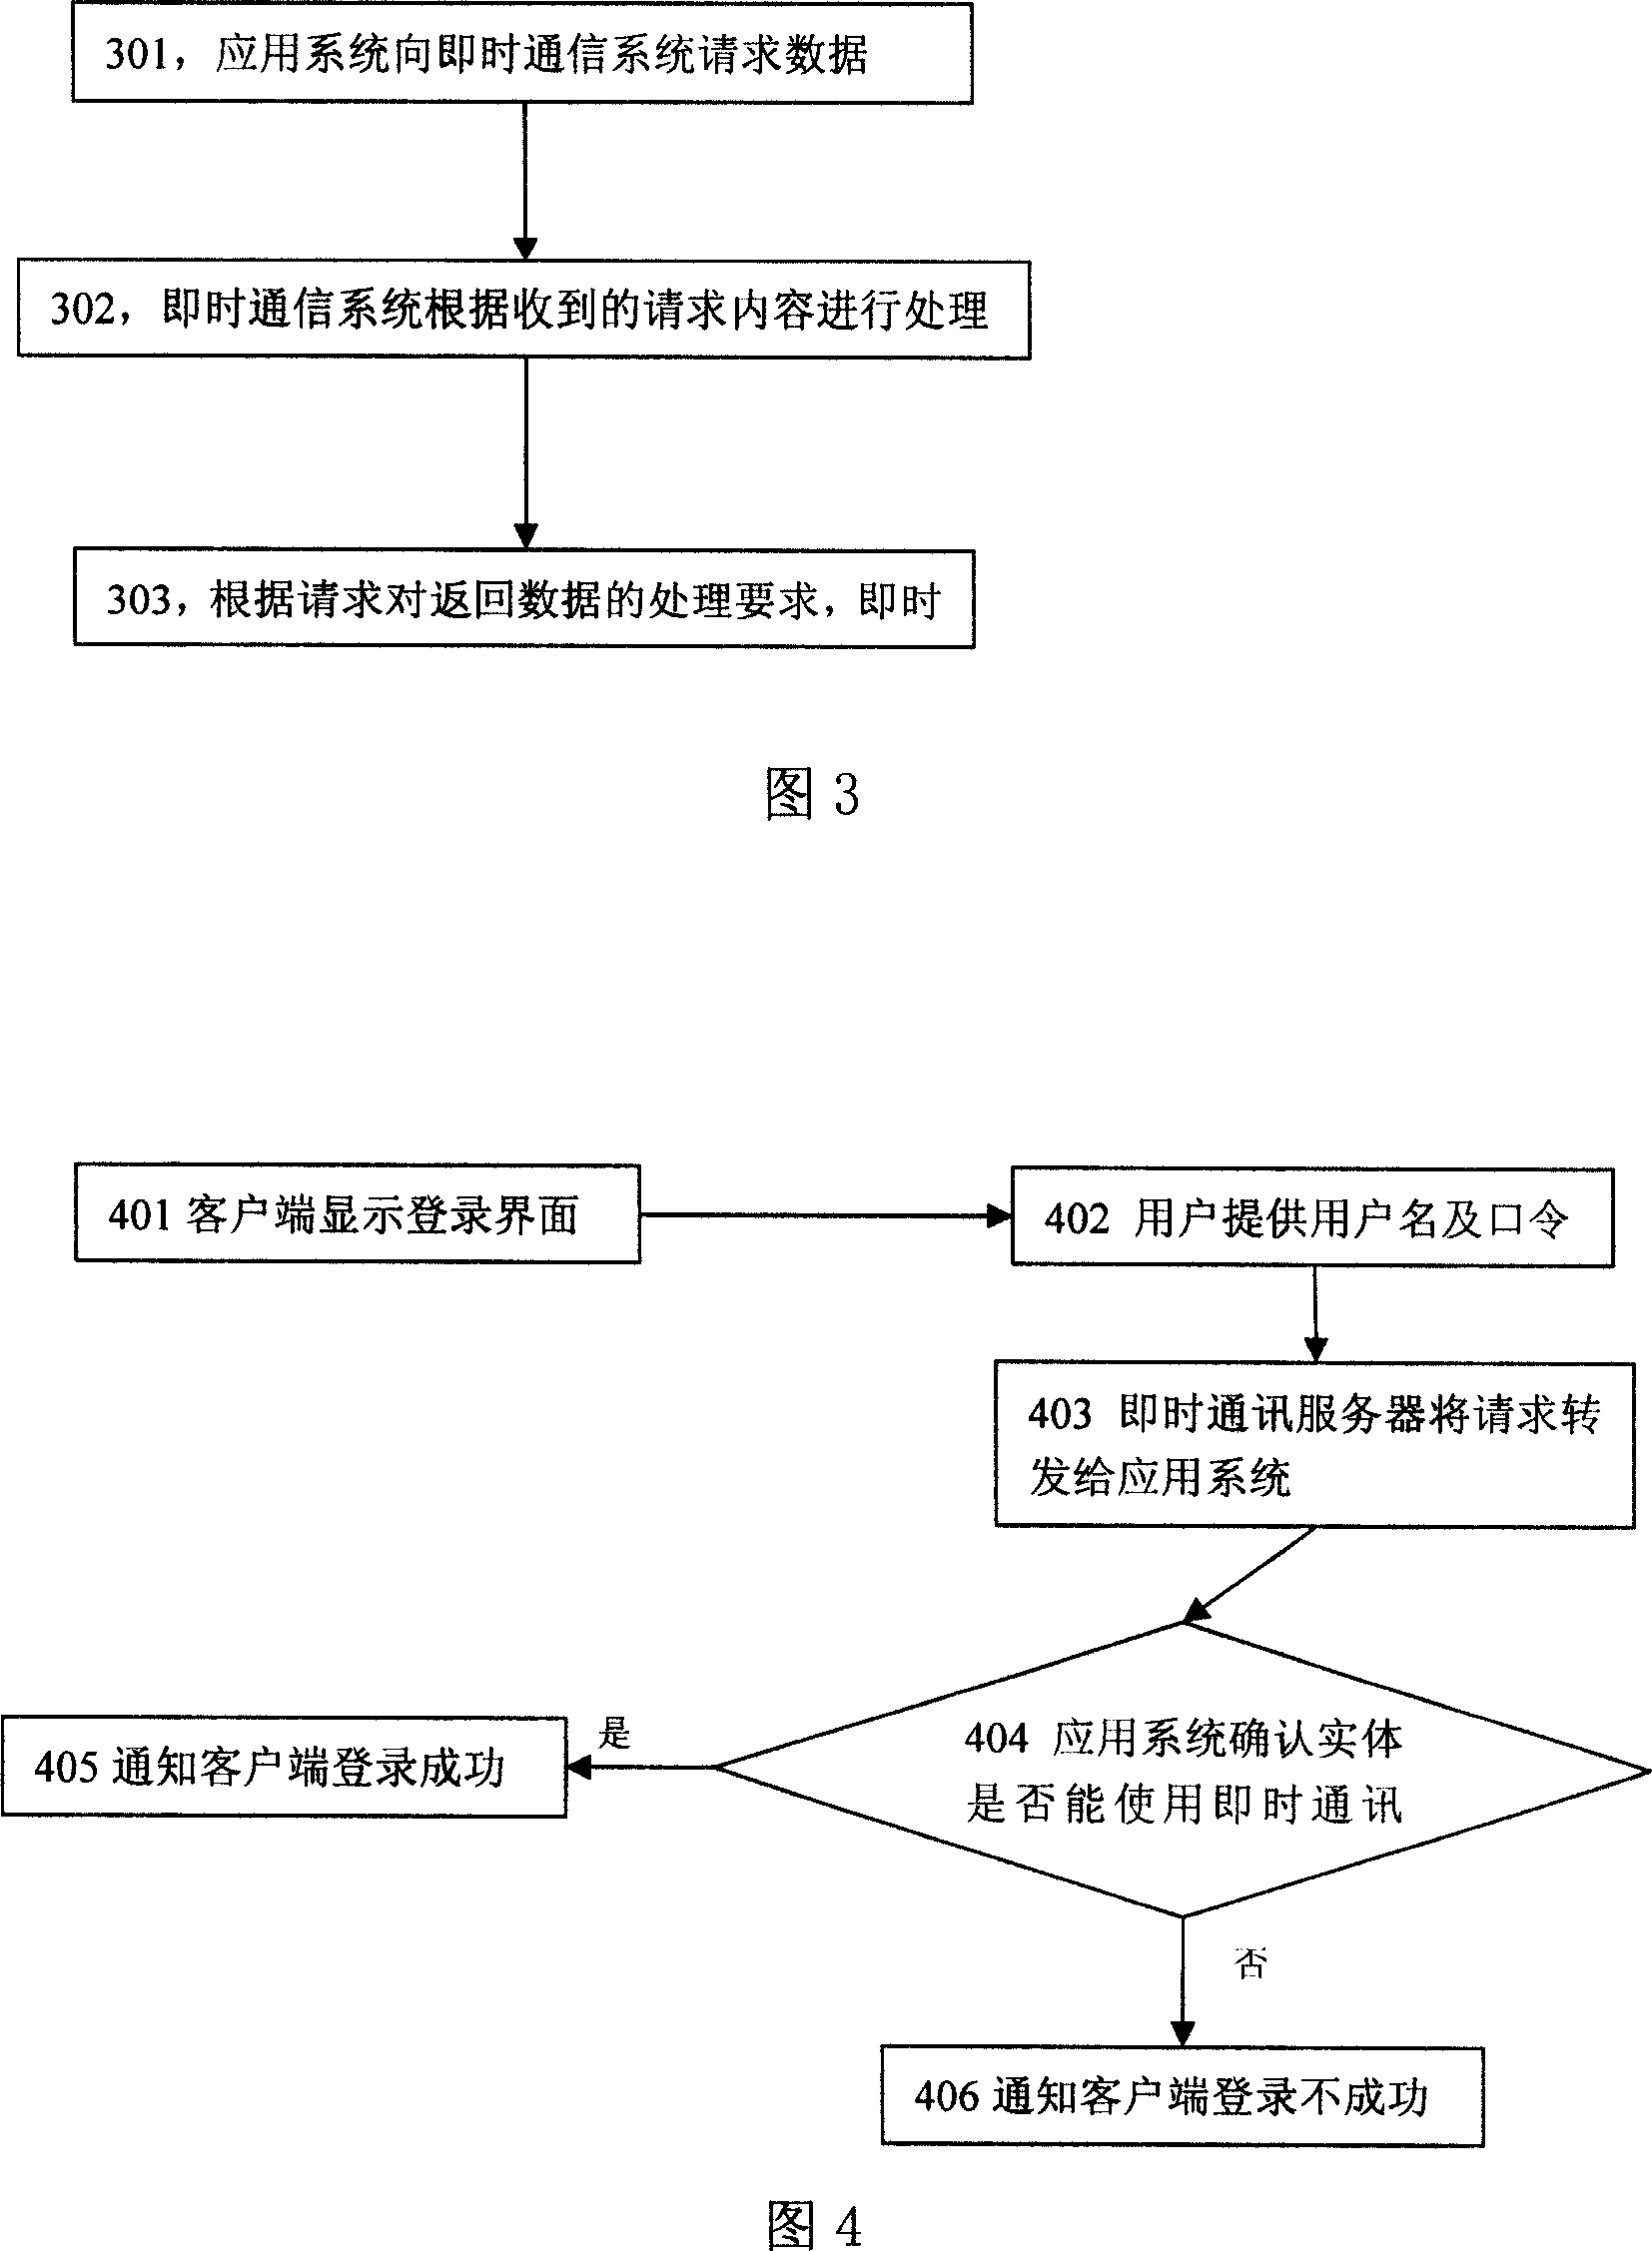 Method and system for providing instant communication function based on application of browser